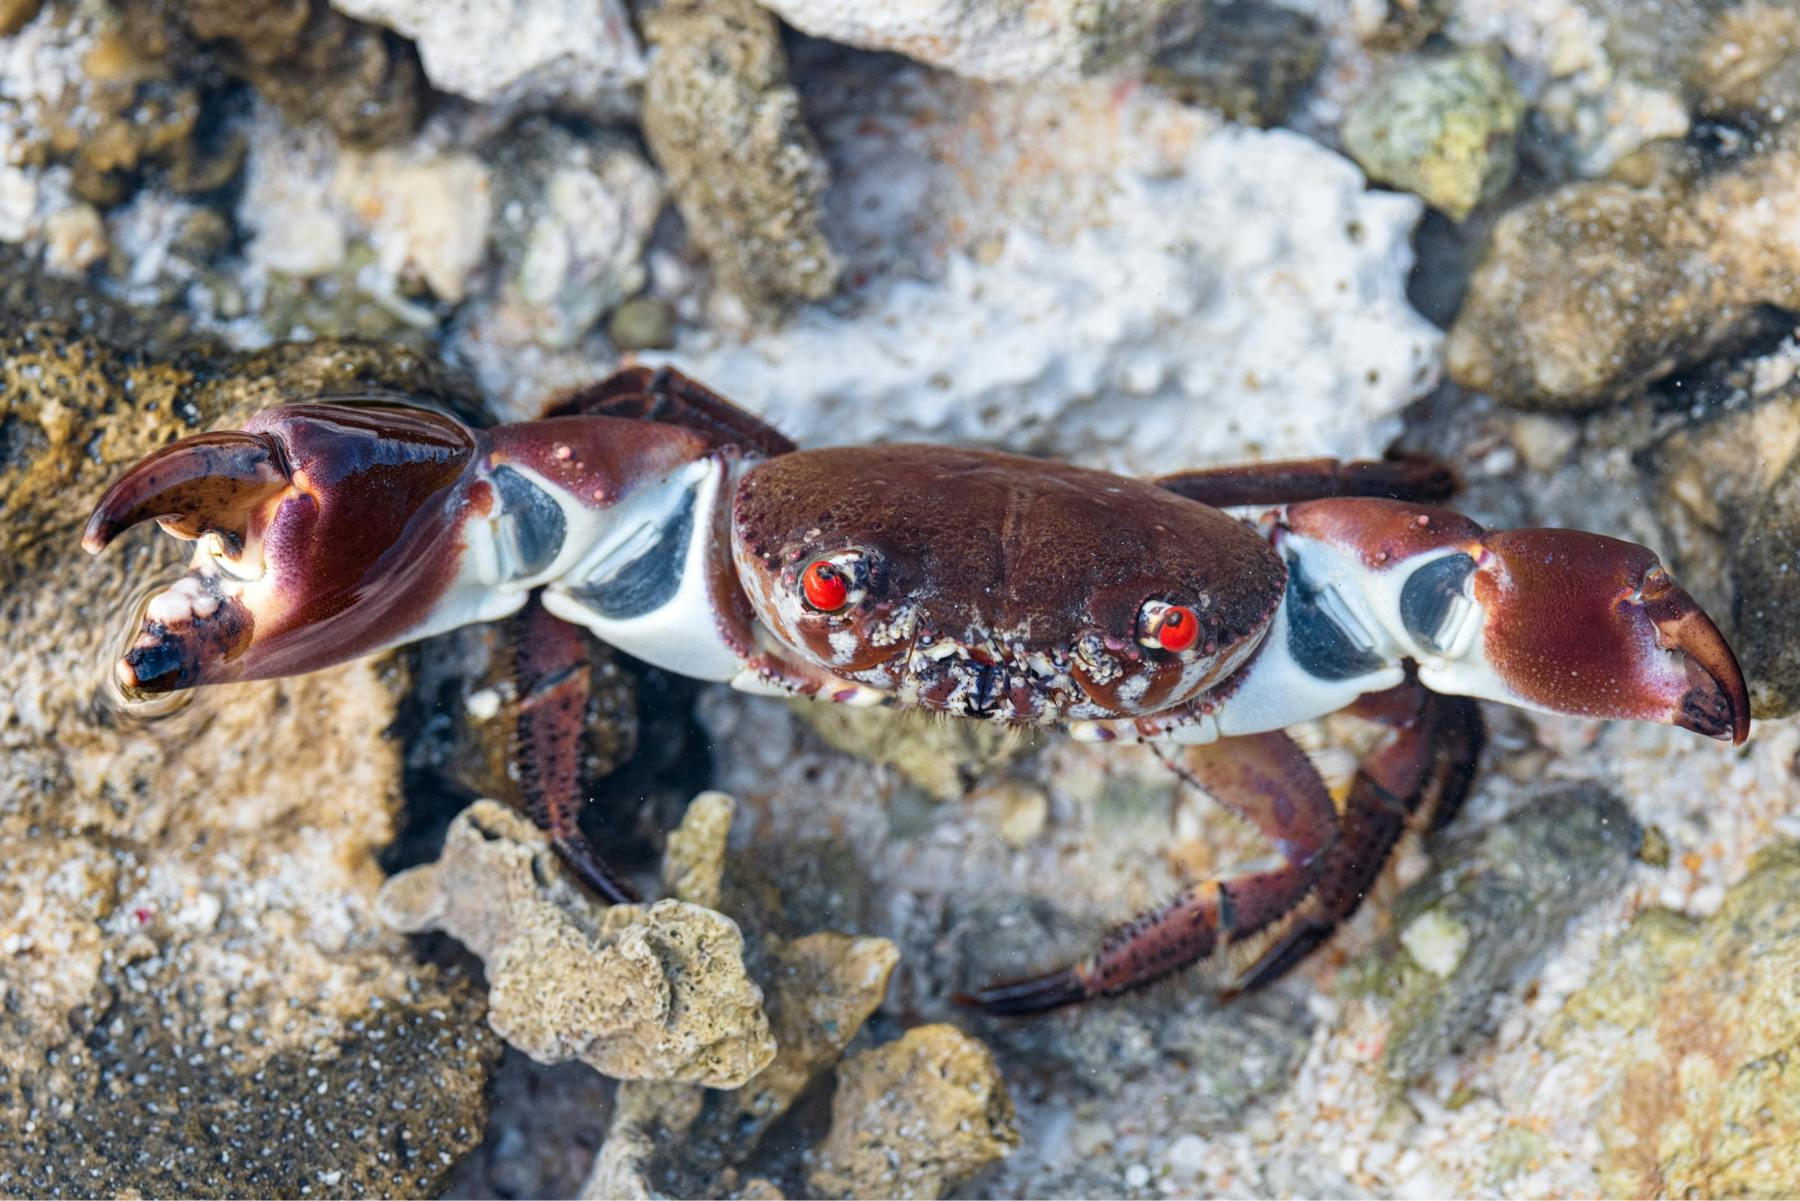 a crab looks upward with red eyes while showing its pinchers